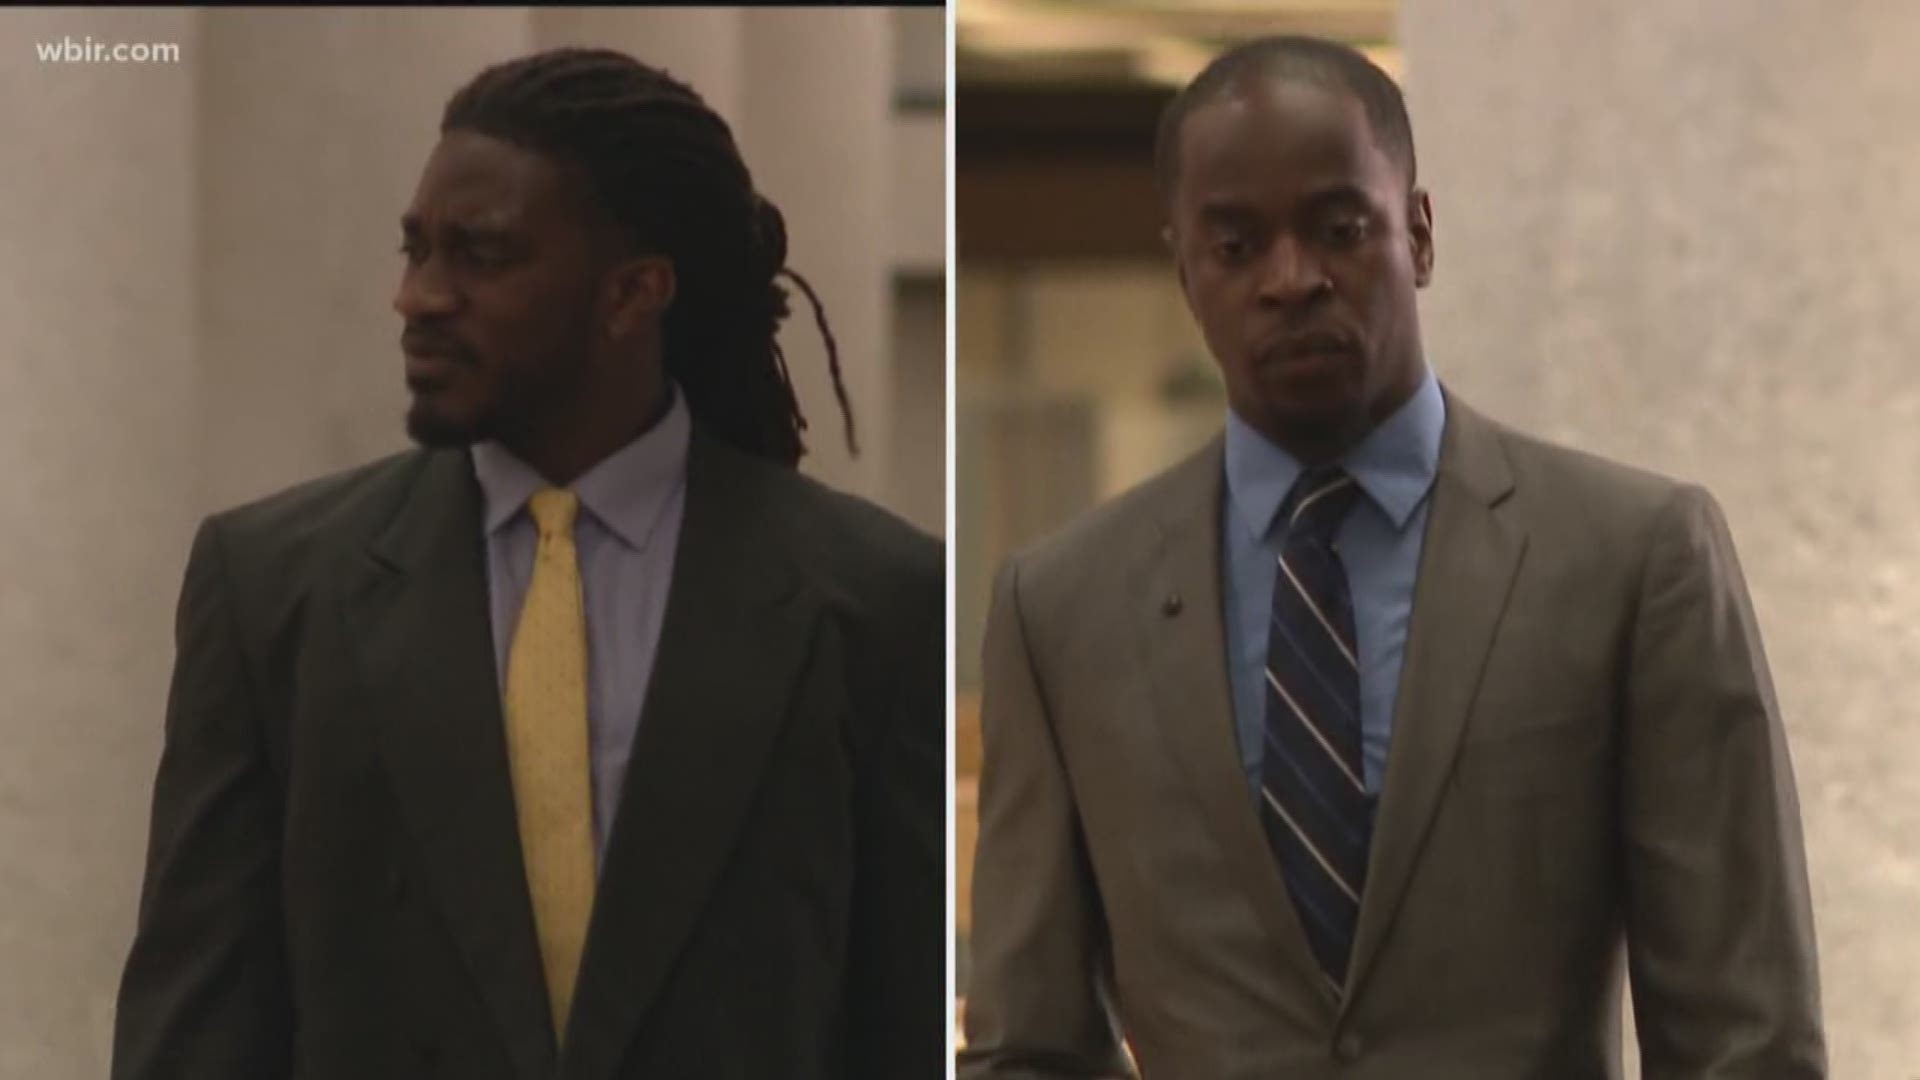 The rape trial for former Vols AJ Johnson and Michael Williams is scheduled to start today in Knox County.